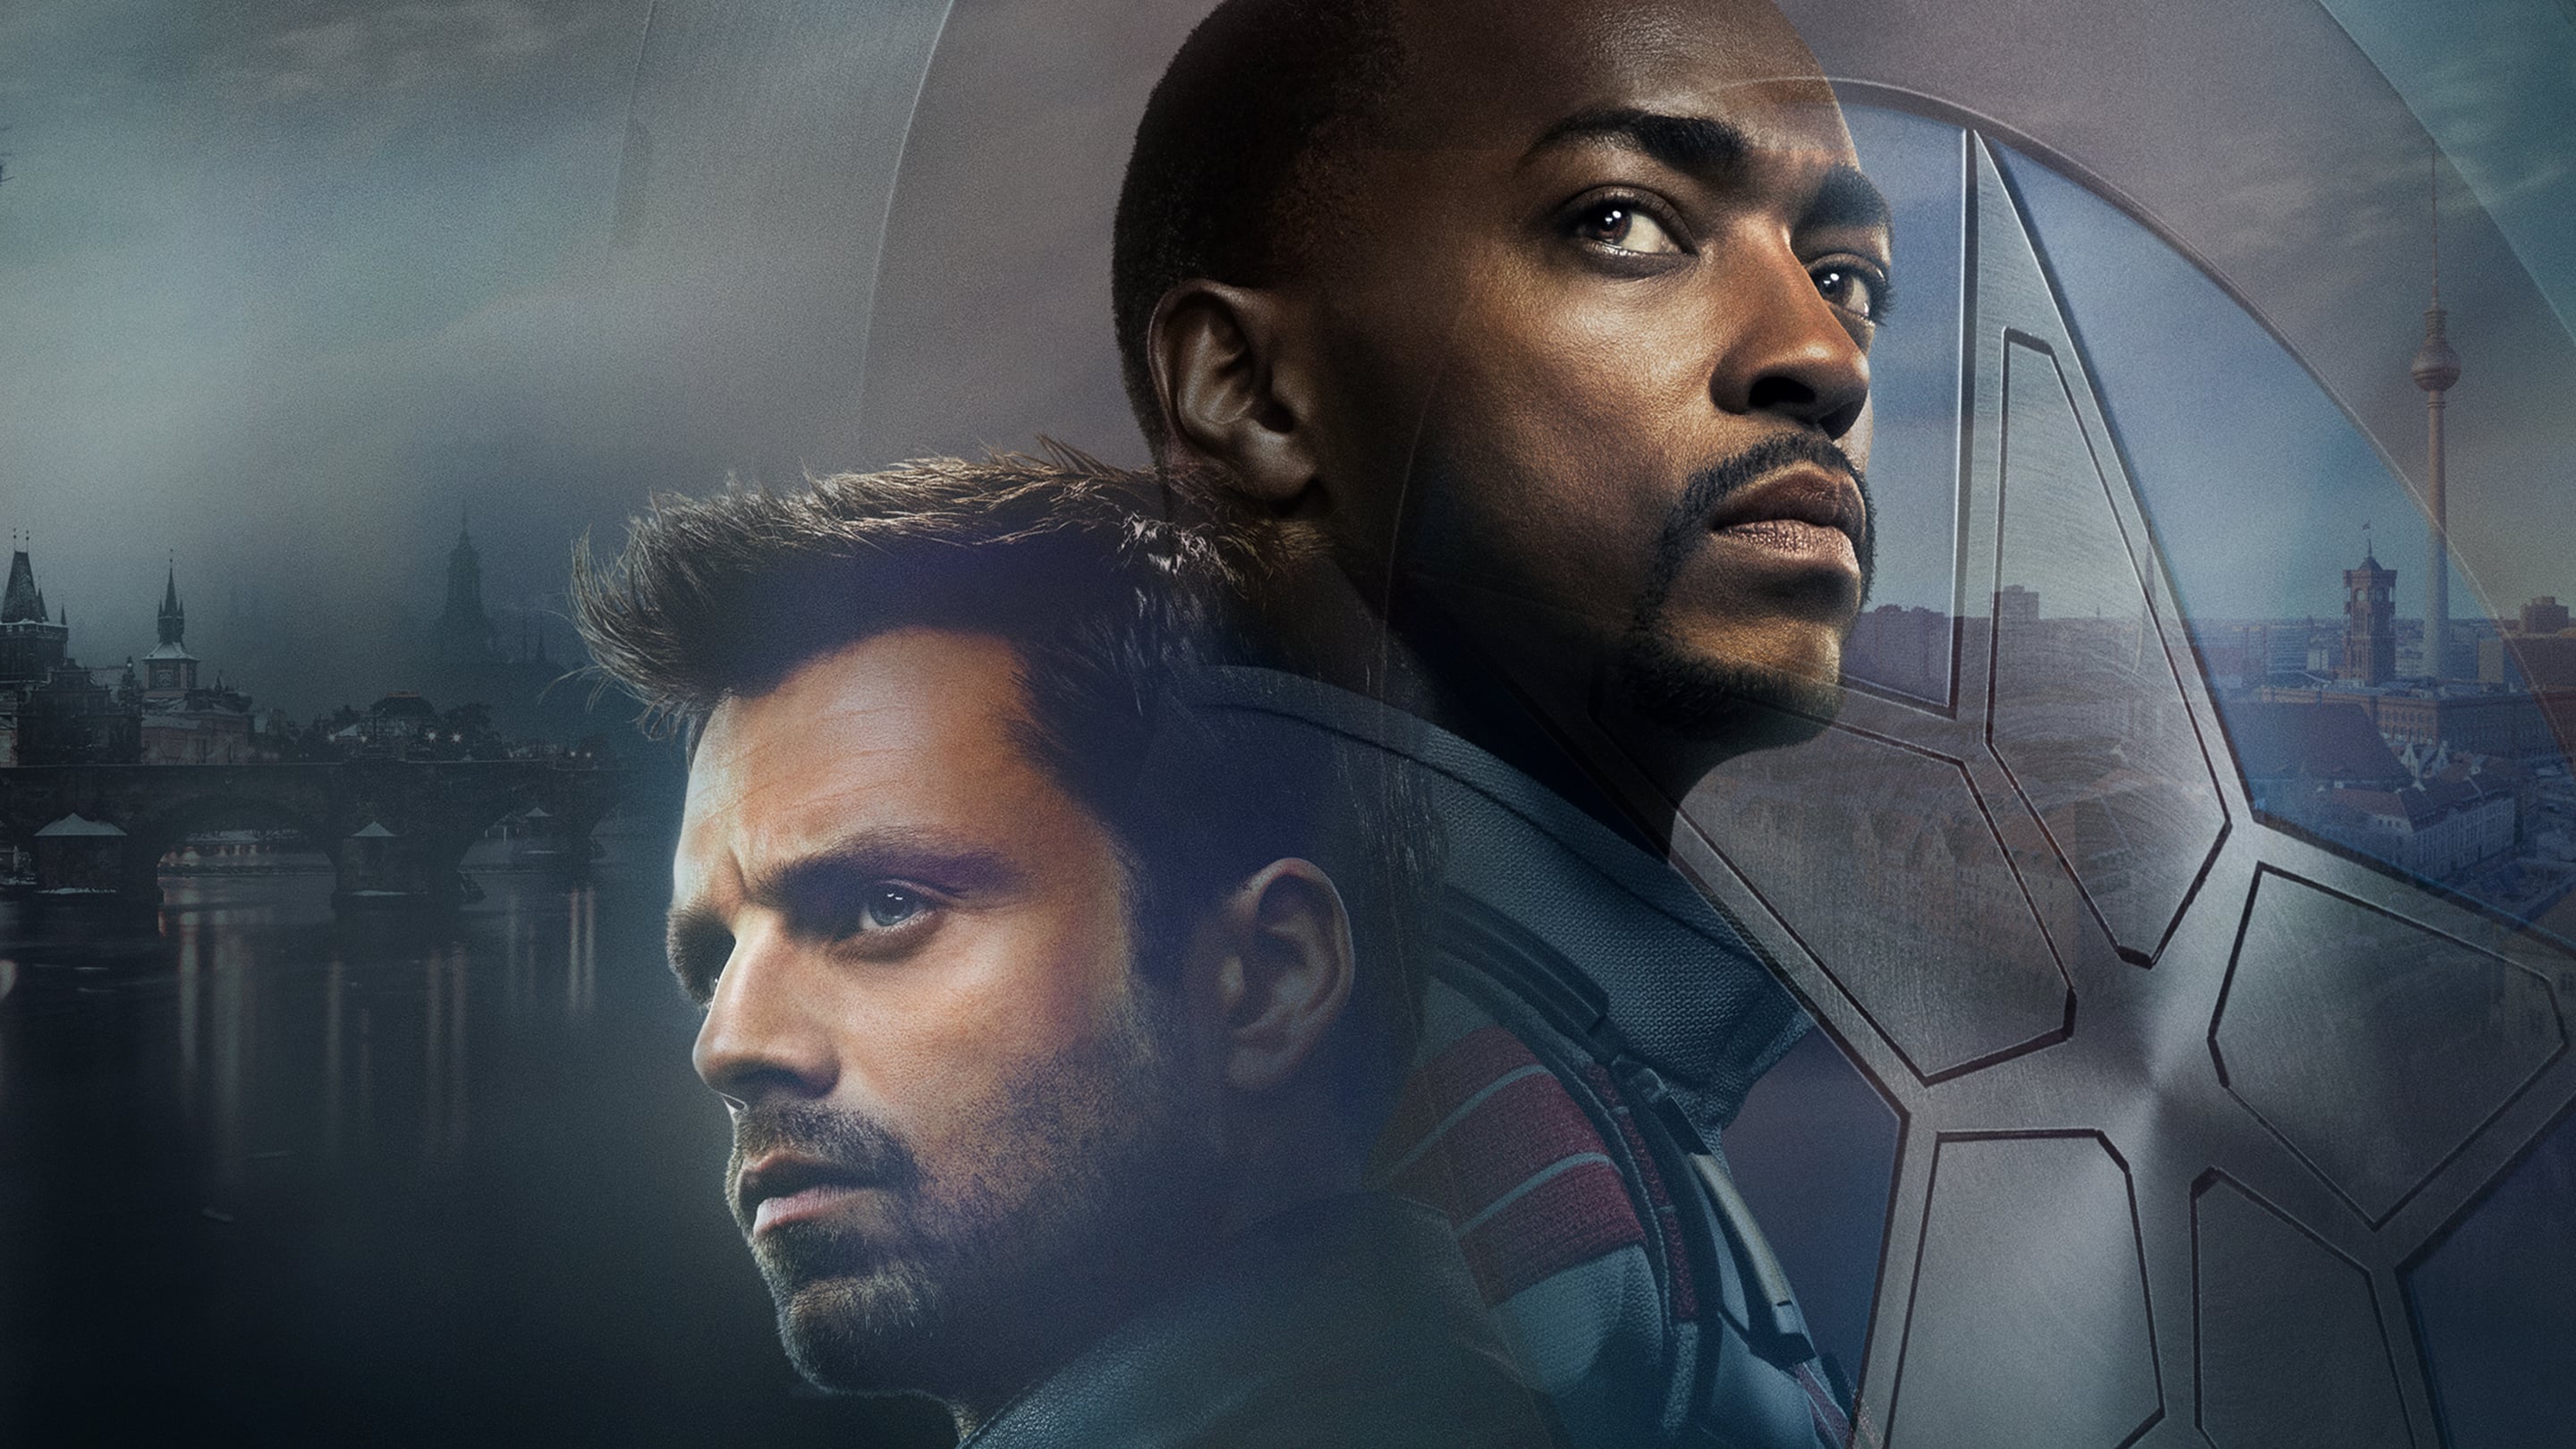 Free HD tv show, the falcon and the winter soldier, anthony mackie, bucky barnes, falcon (marvel comics), sam wilson, sebastian stan, winter soldier